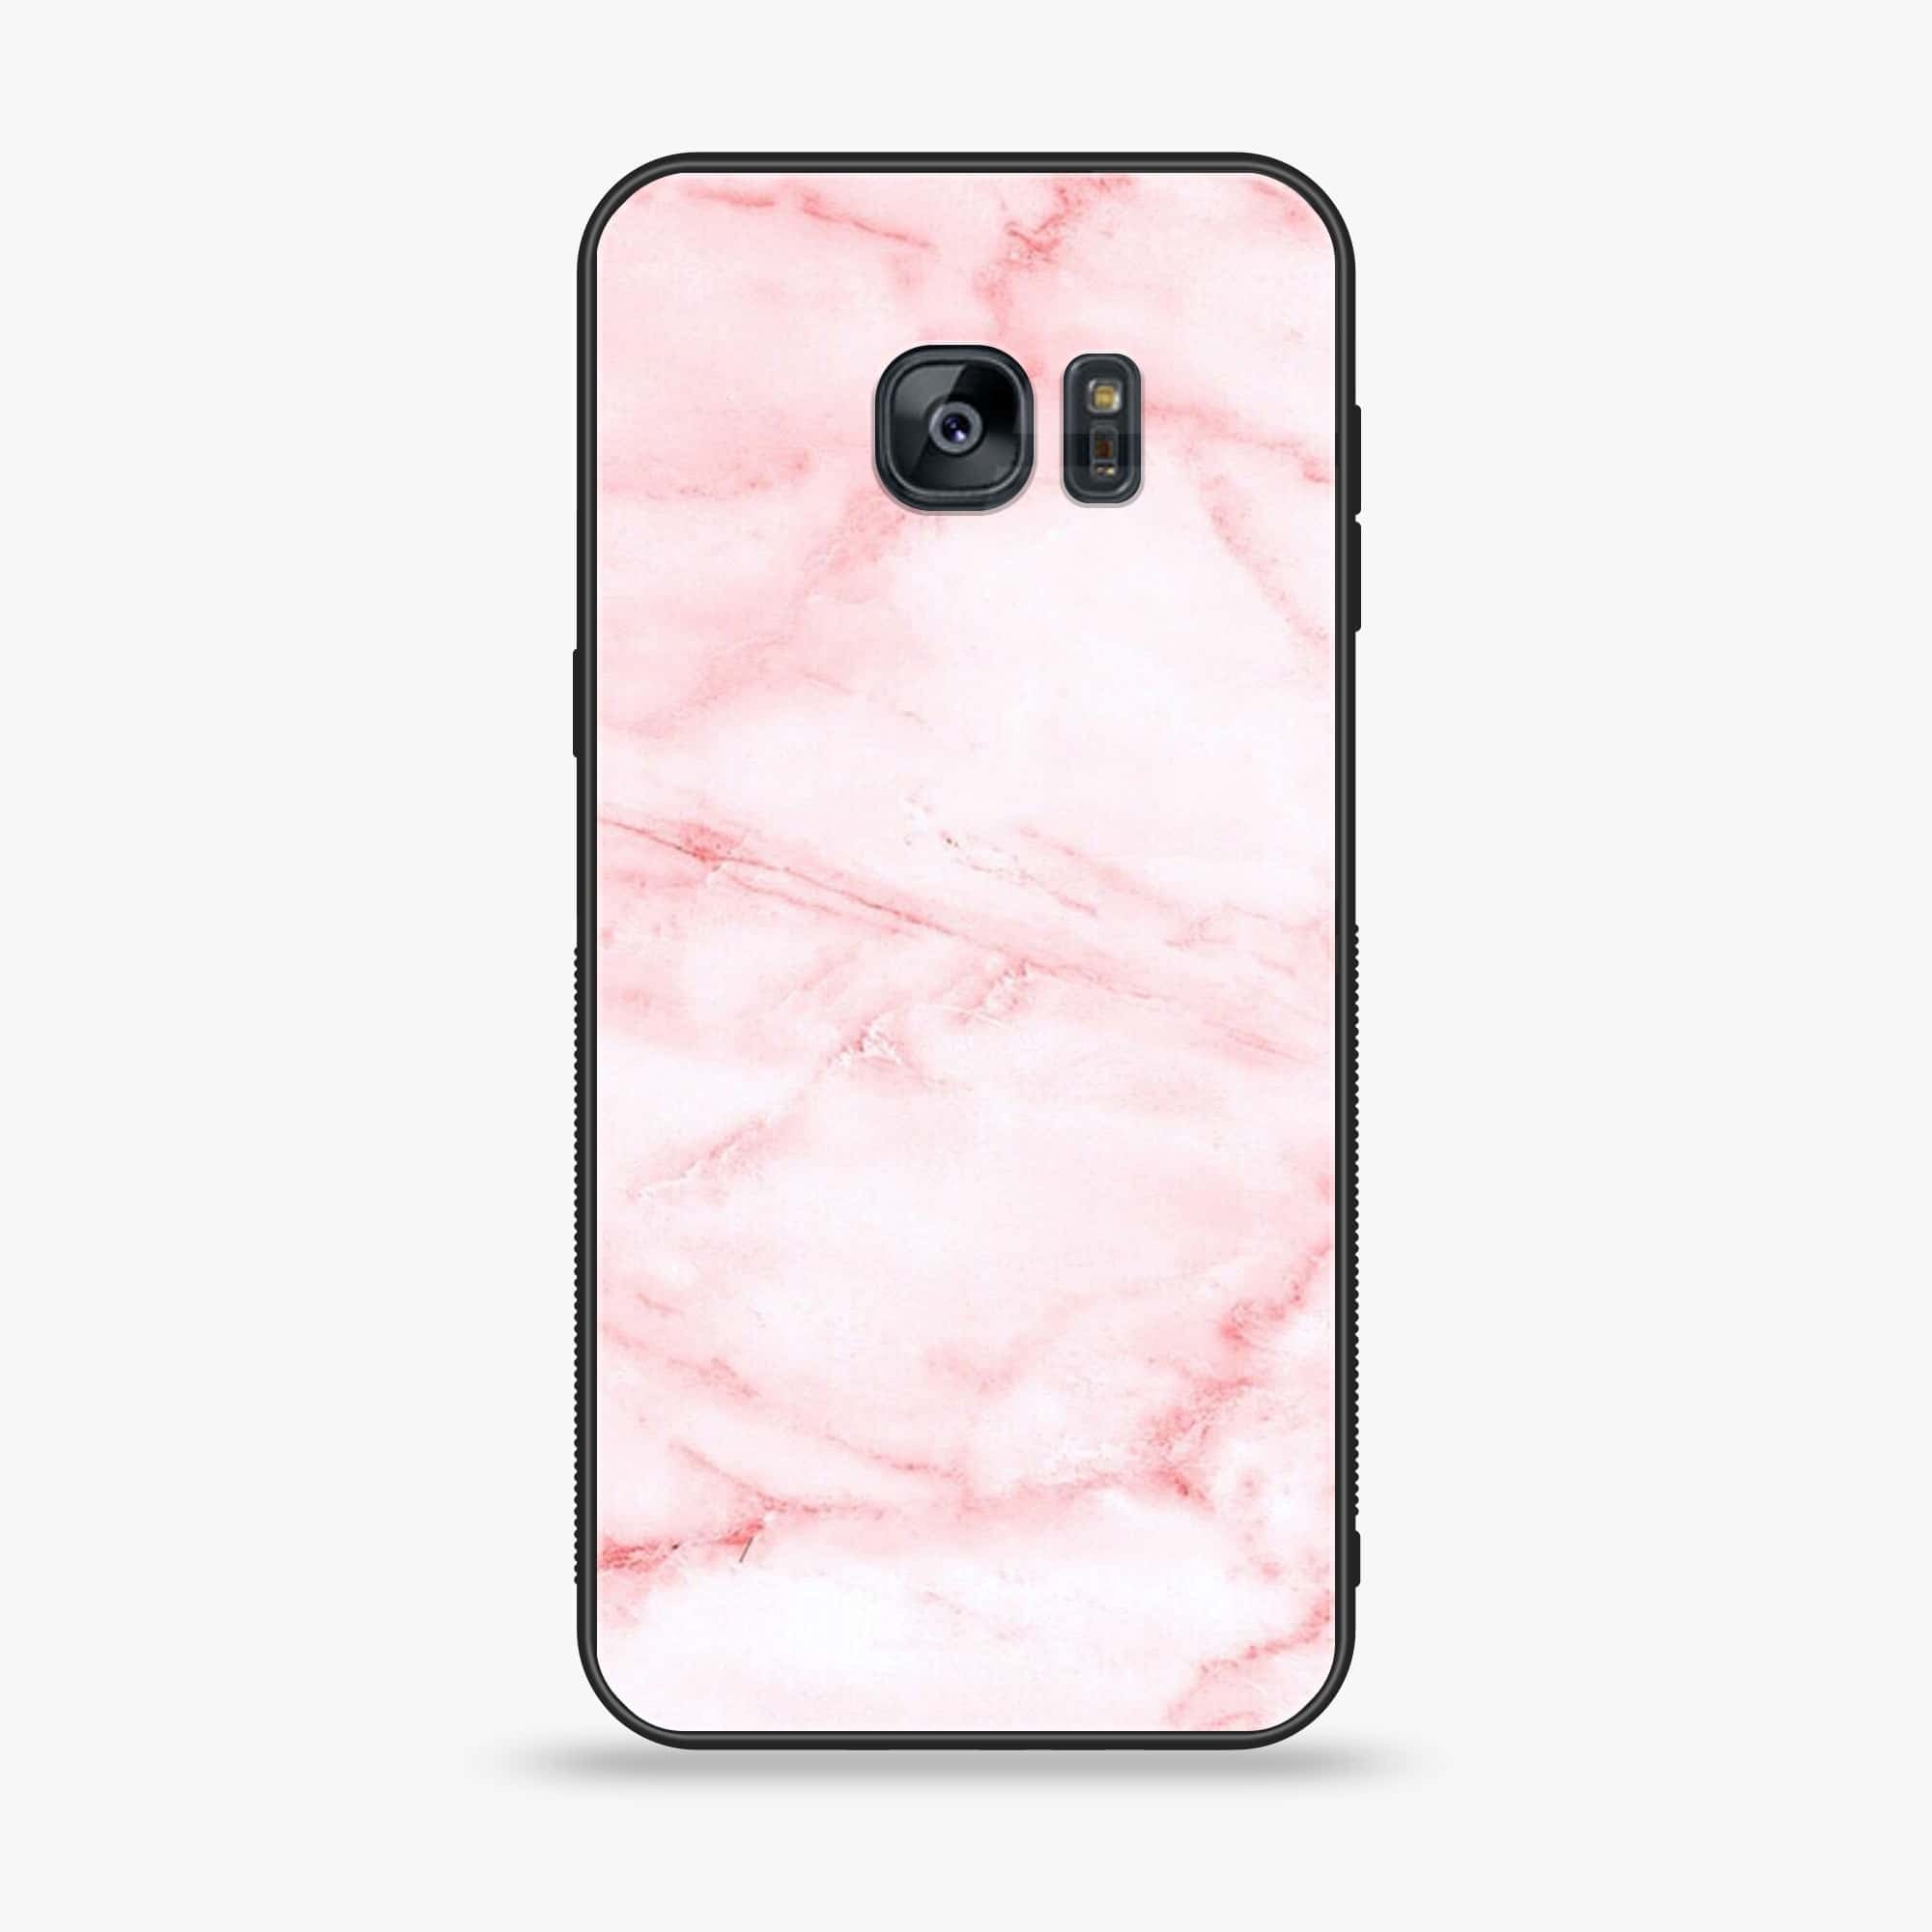 Samsung Galaxy S7 - Pink Marble Series - Premium Printed Glass soft Bumper shock Proof Case